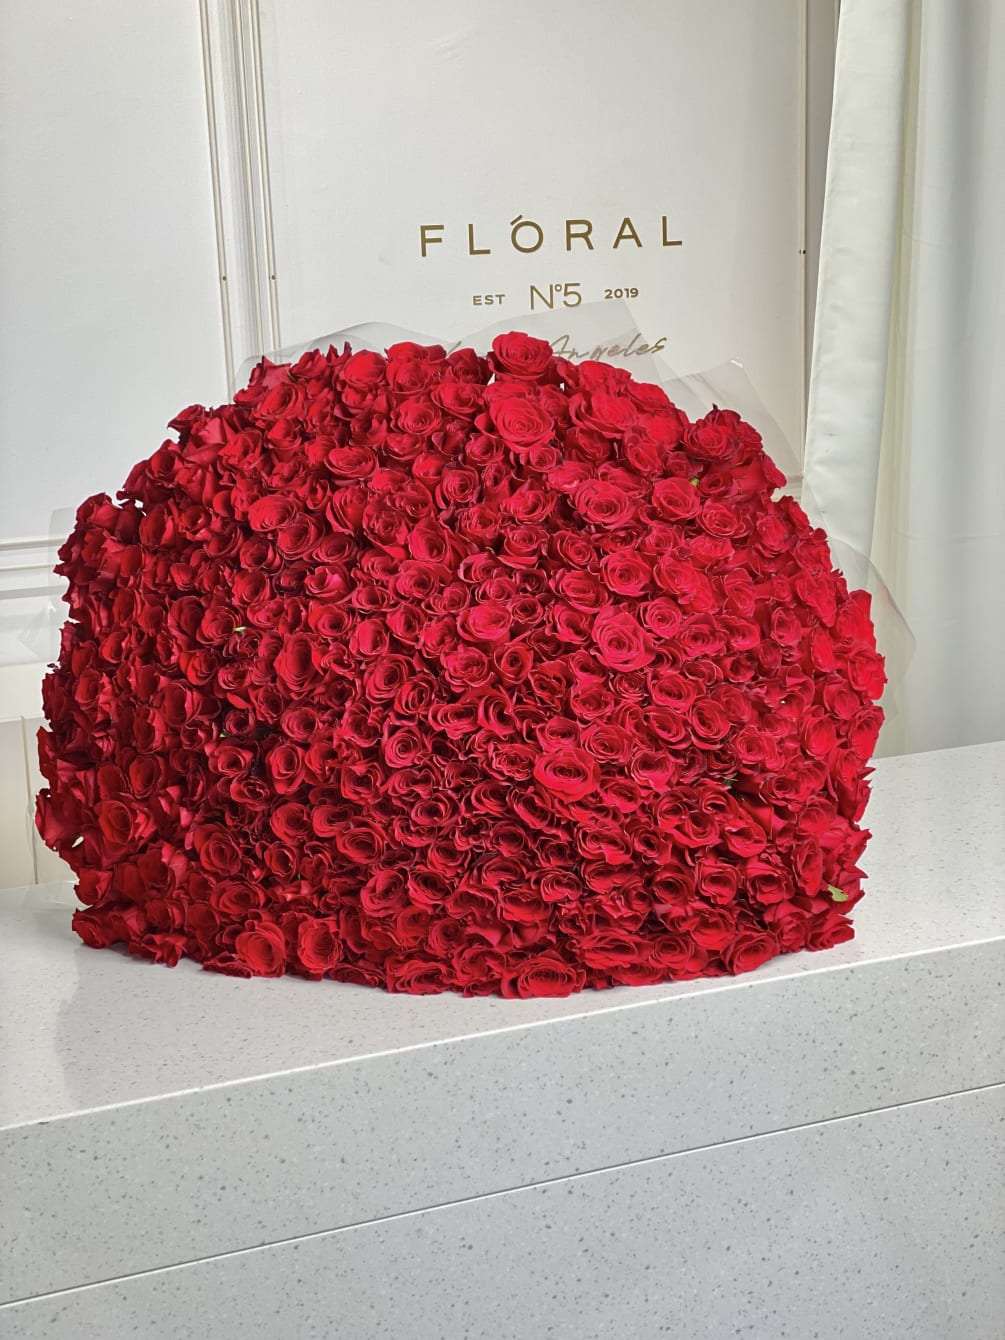 Giant Bouquet of 300 Red Roses - Luxurious Gift for any reason.